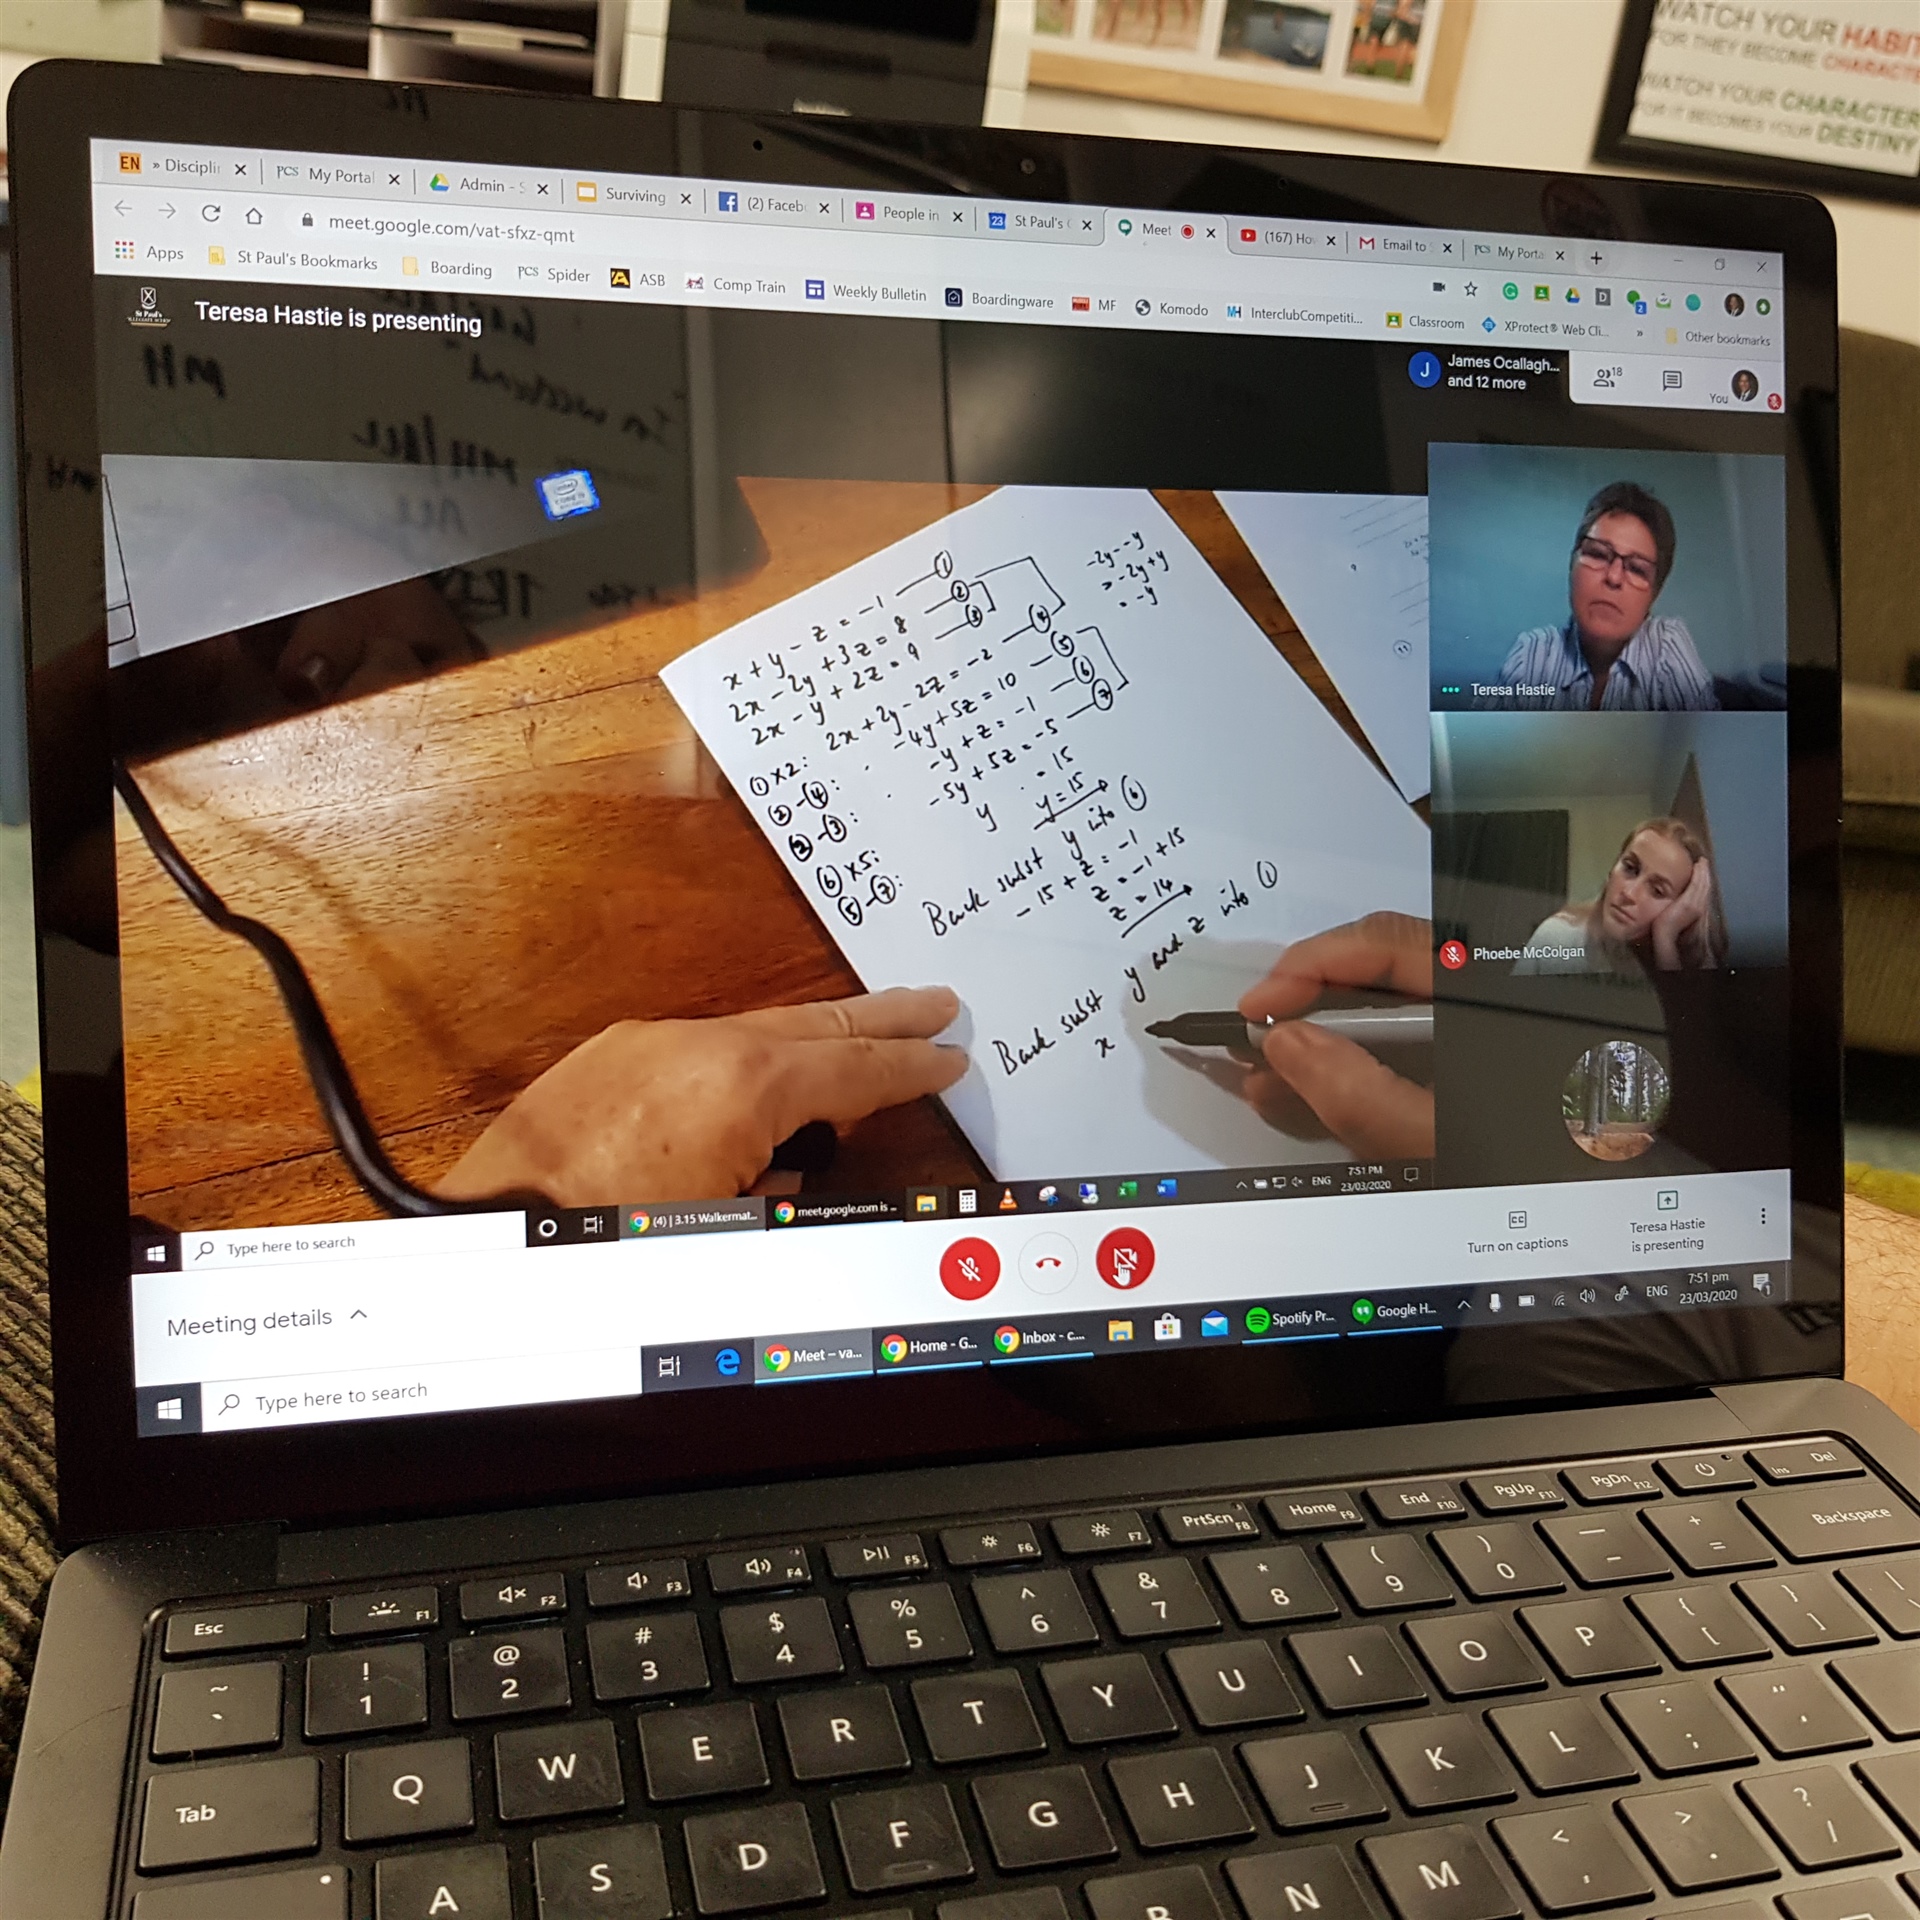 Embracing distance learning and living through the lockdown